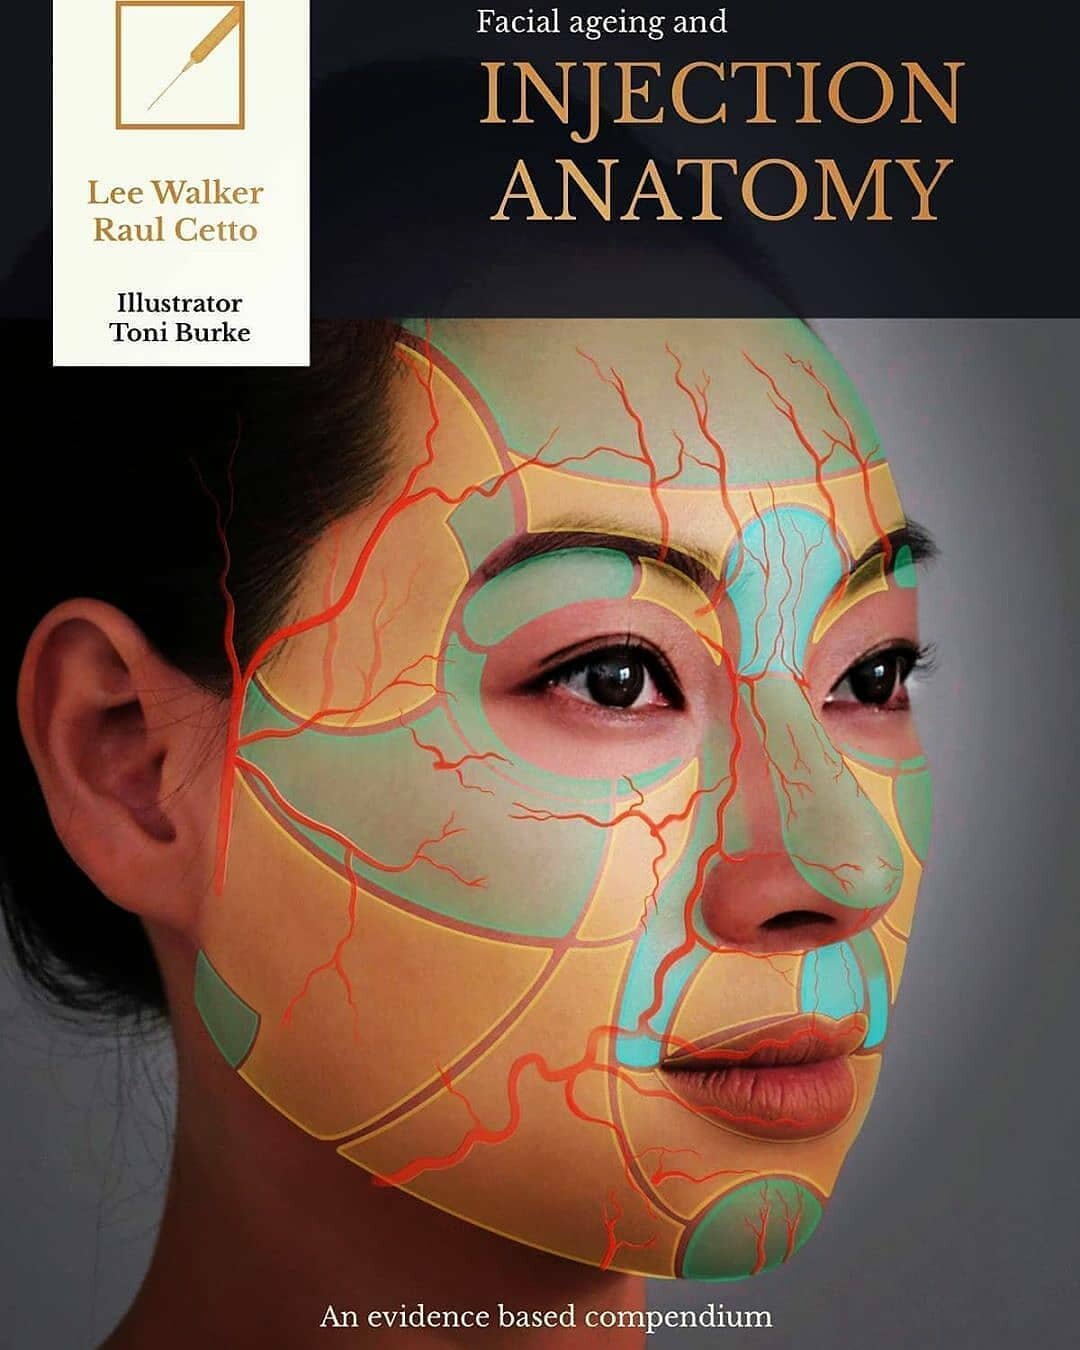 We are very excited to reveal our evidence based book on facial ageing and injection anatomy.. authored with my incredible colleagues @leewalker_academy @drtoniburke Pre register your interest via email to info@leewalkeracademy.com or  info@aesthetic